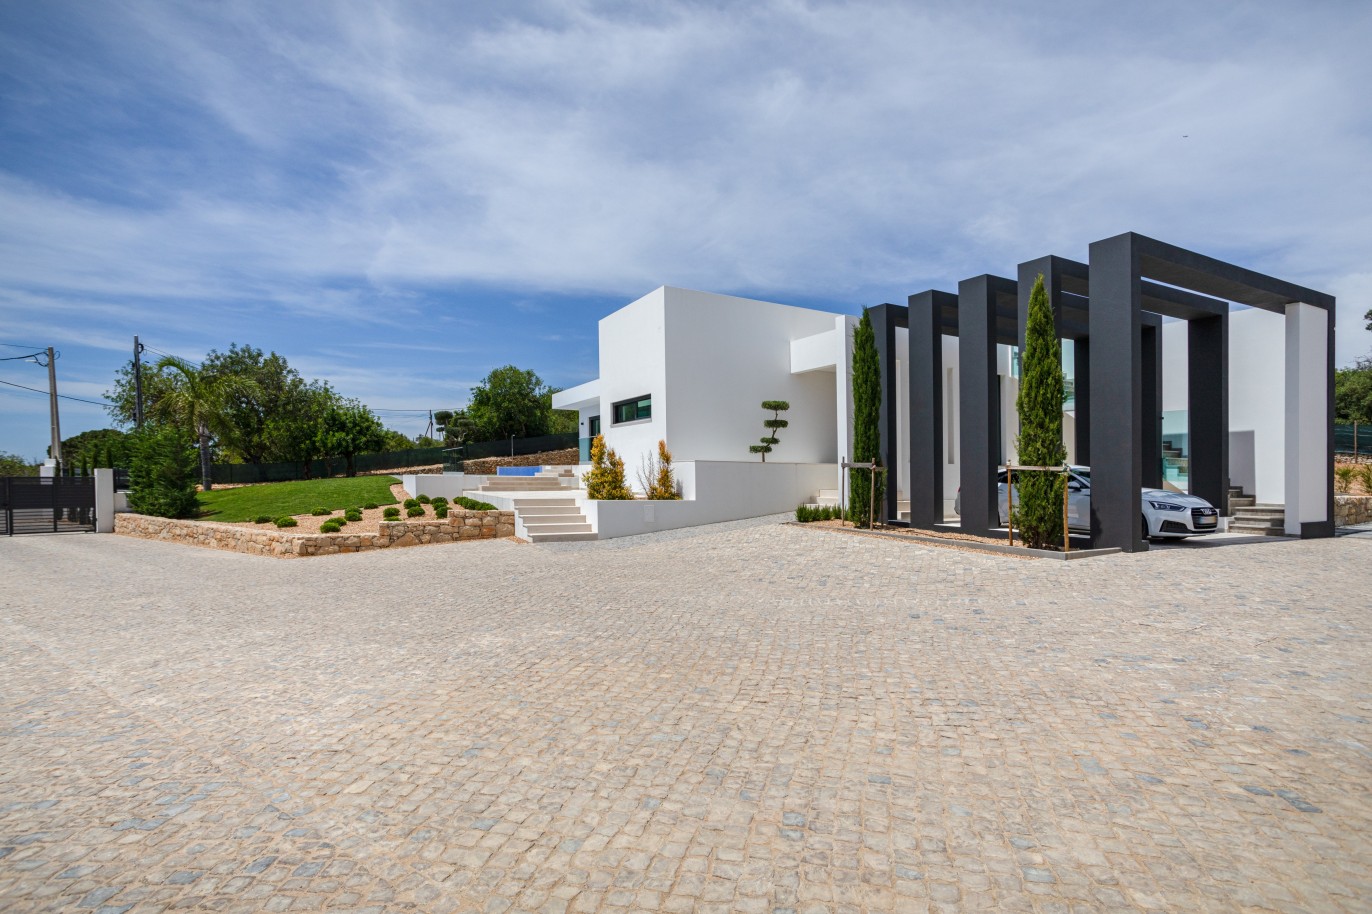 4+1 Bedroom Villa with pool and sea view, for sale in Loulé, Algarve_225752